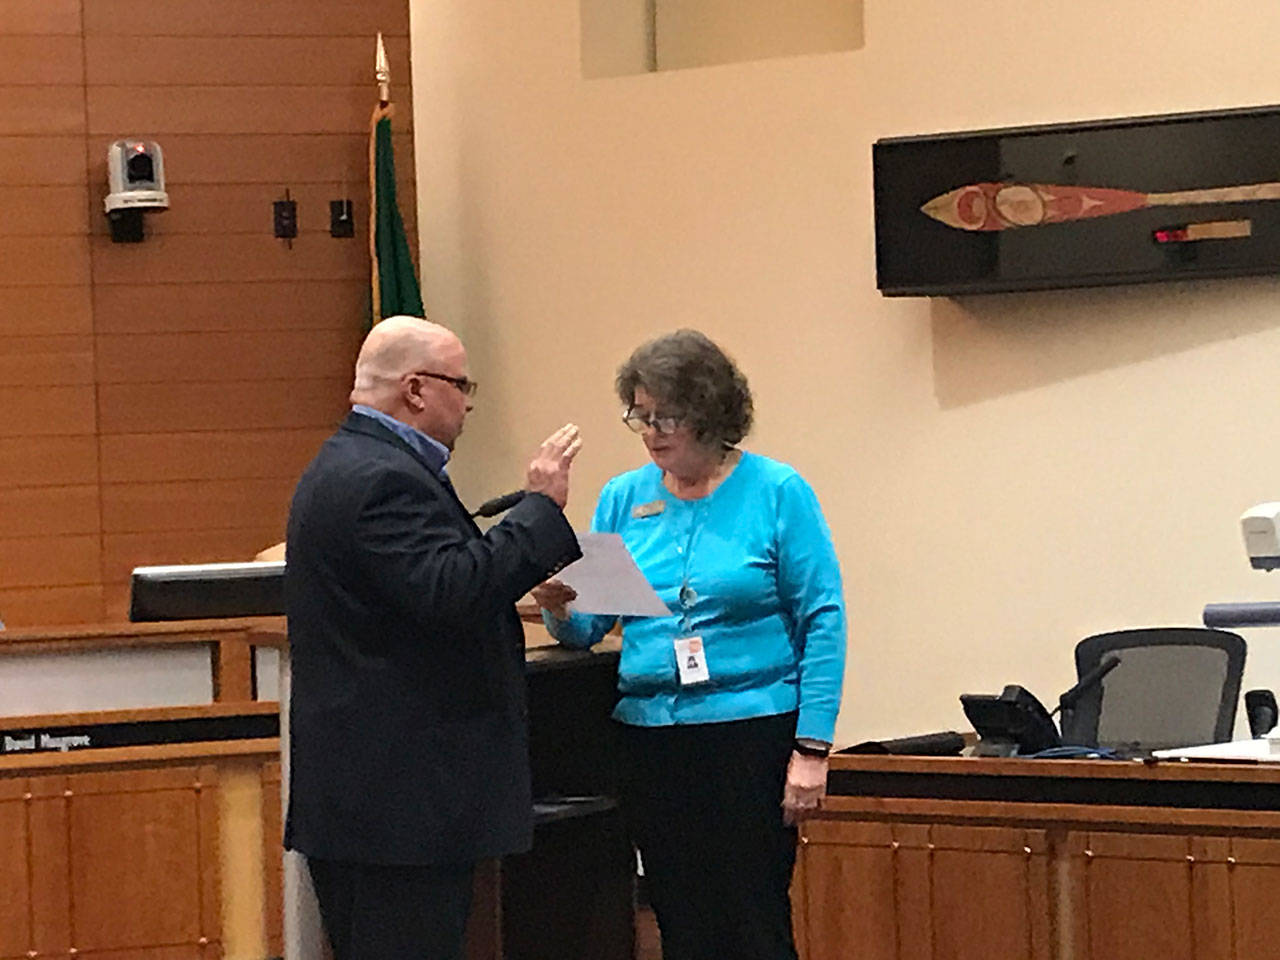 Gary McVey was sworn into his position on the Poulsbo City Council on Dec. 4.